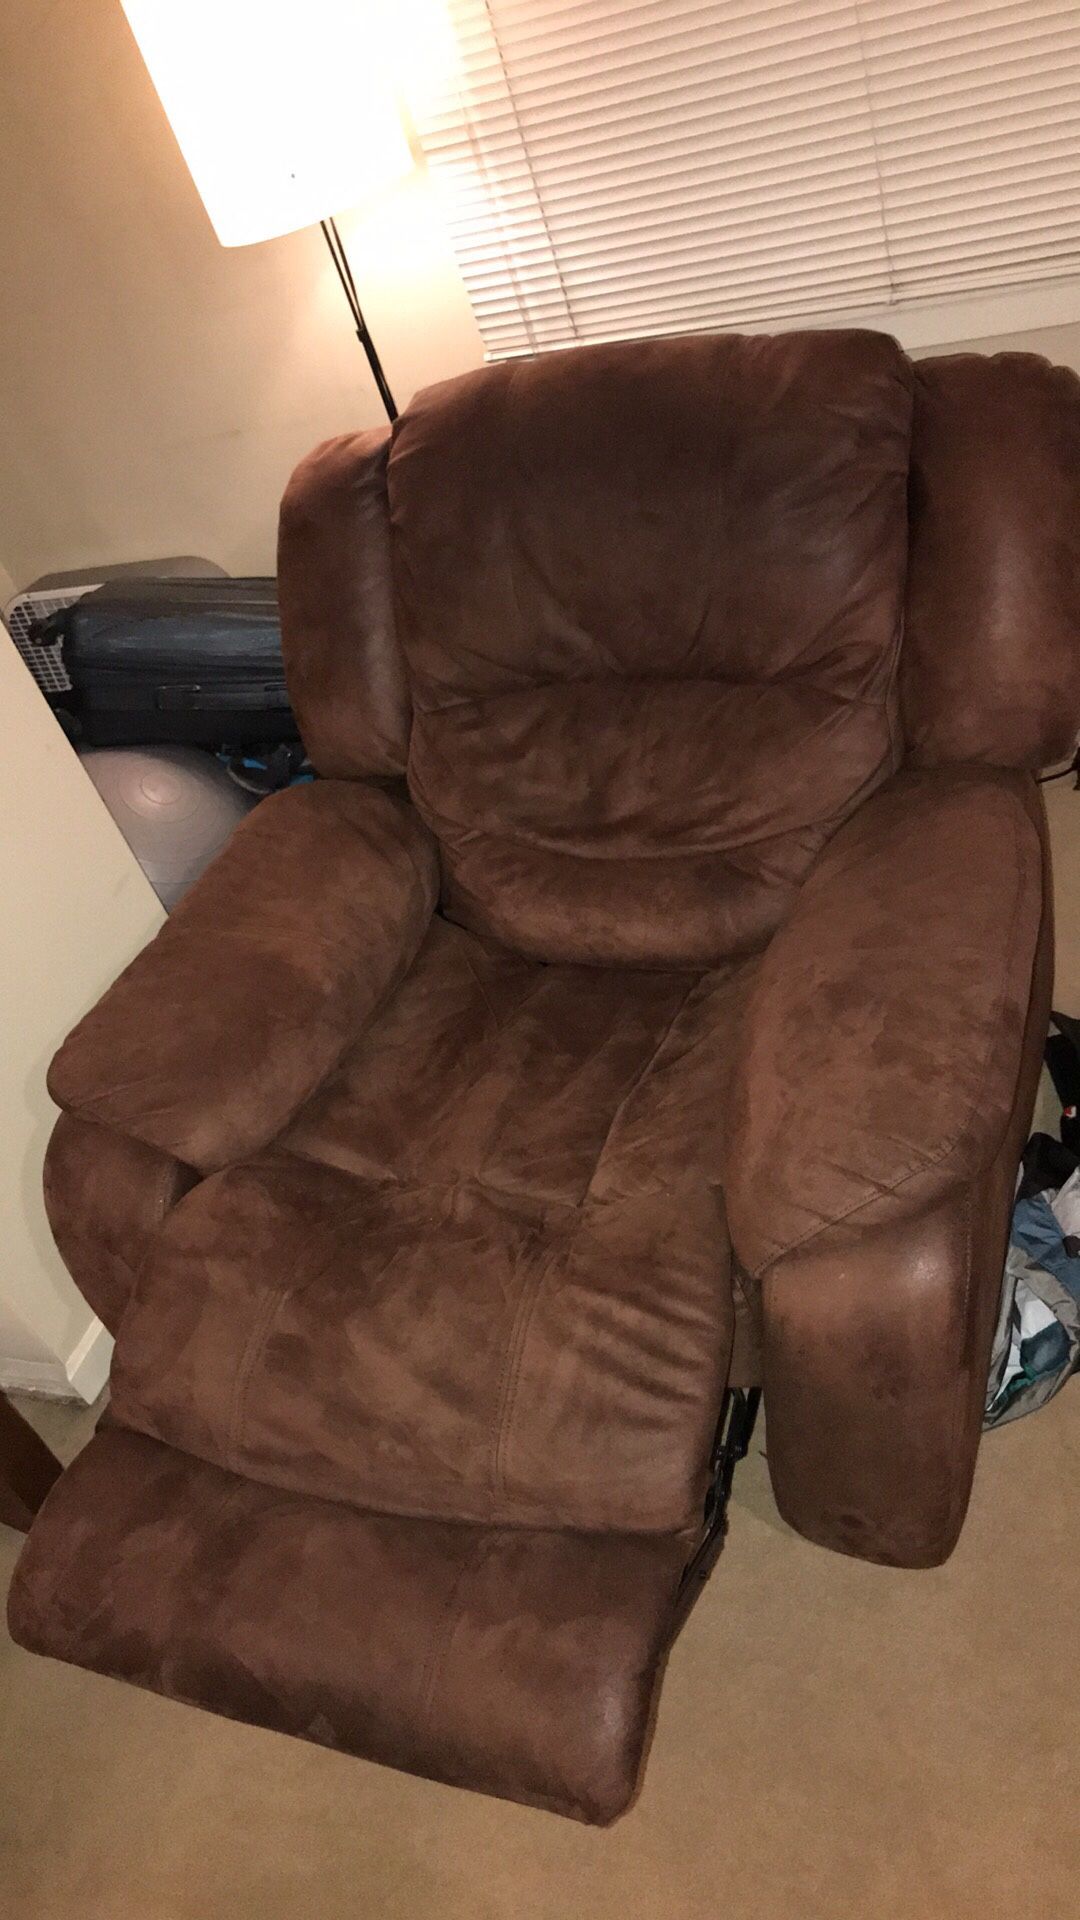 Large brown recliner chair